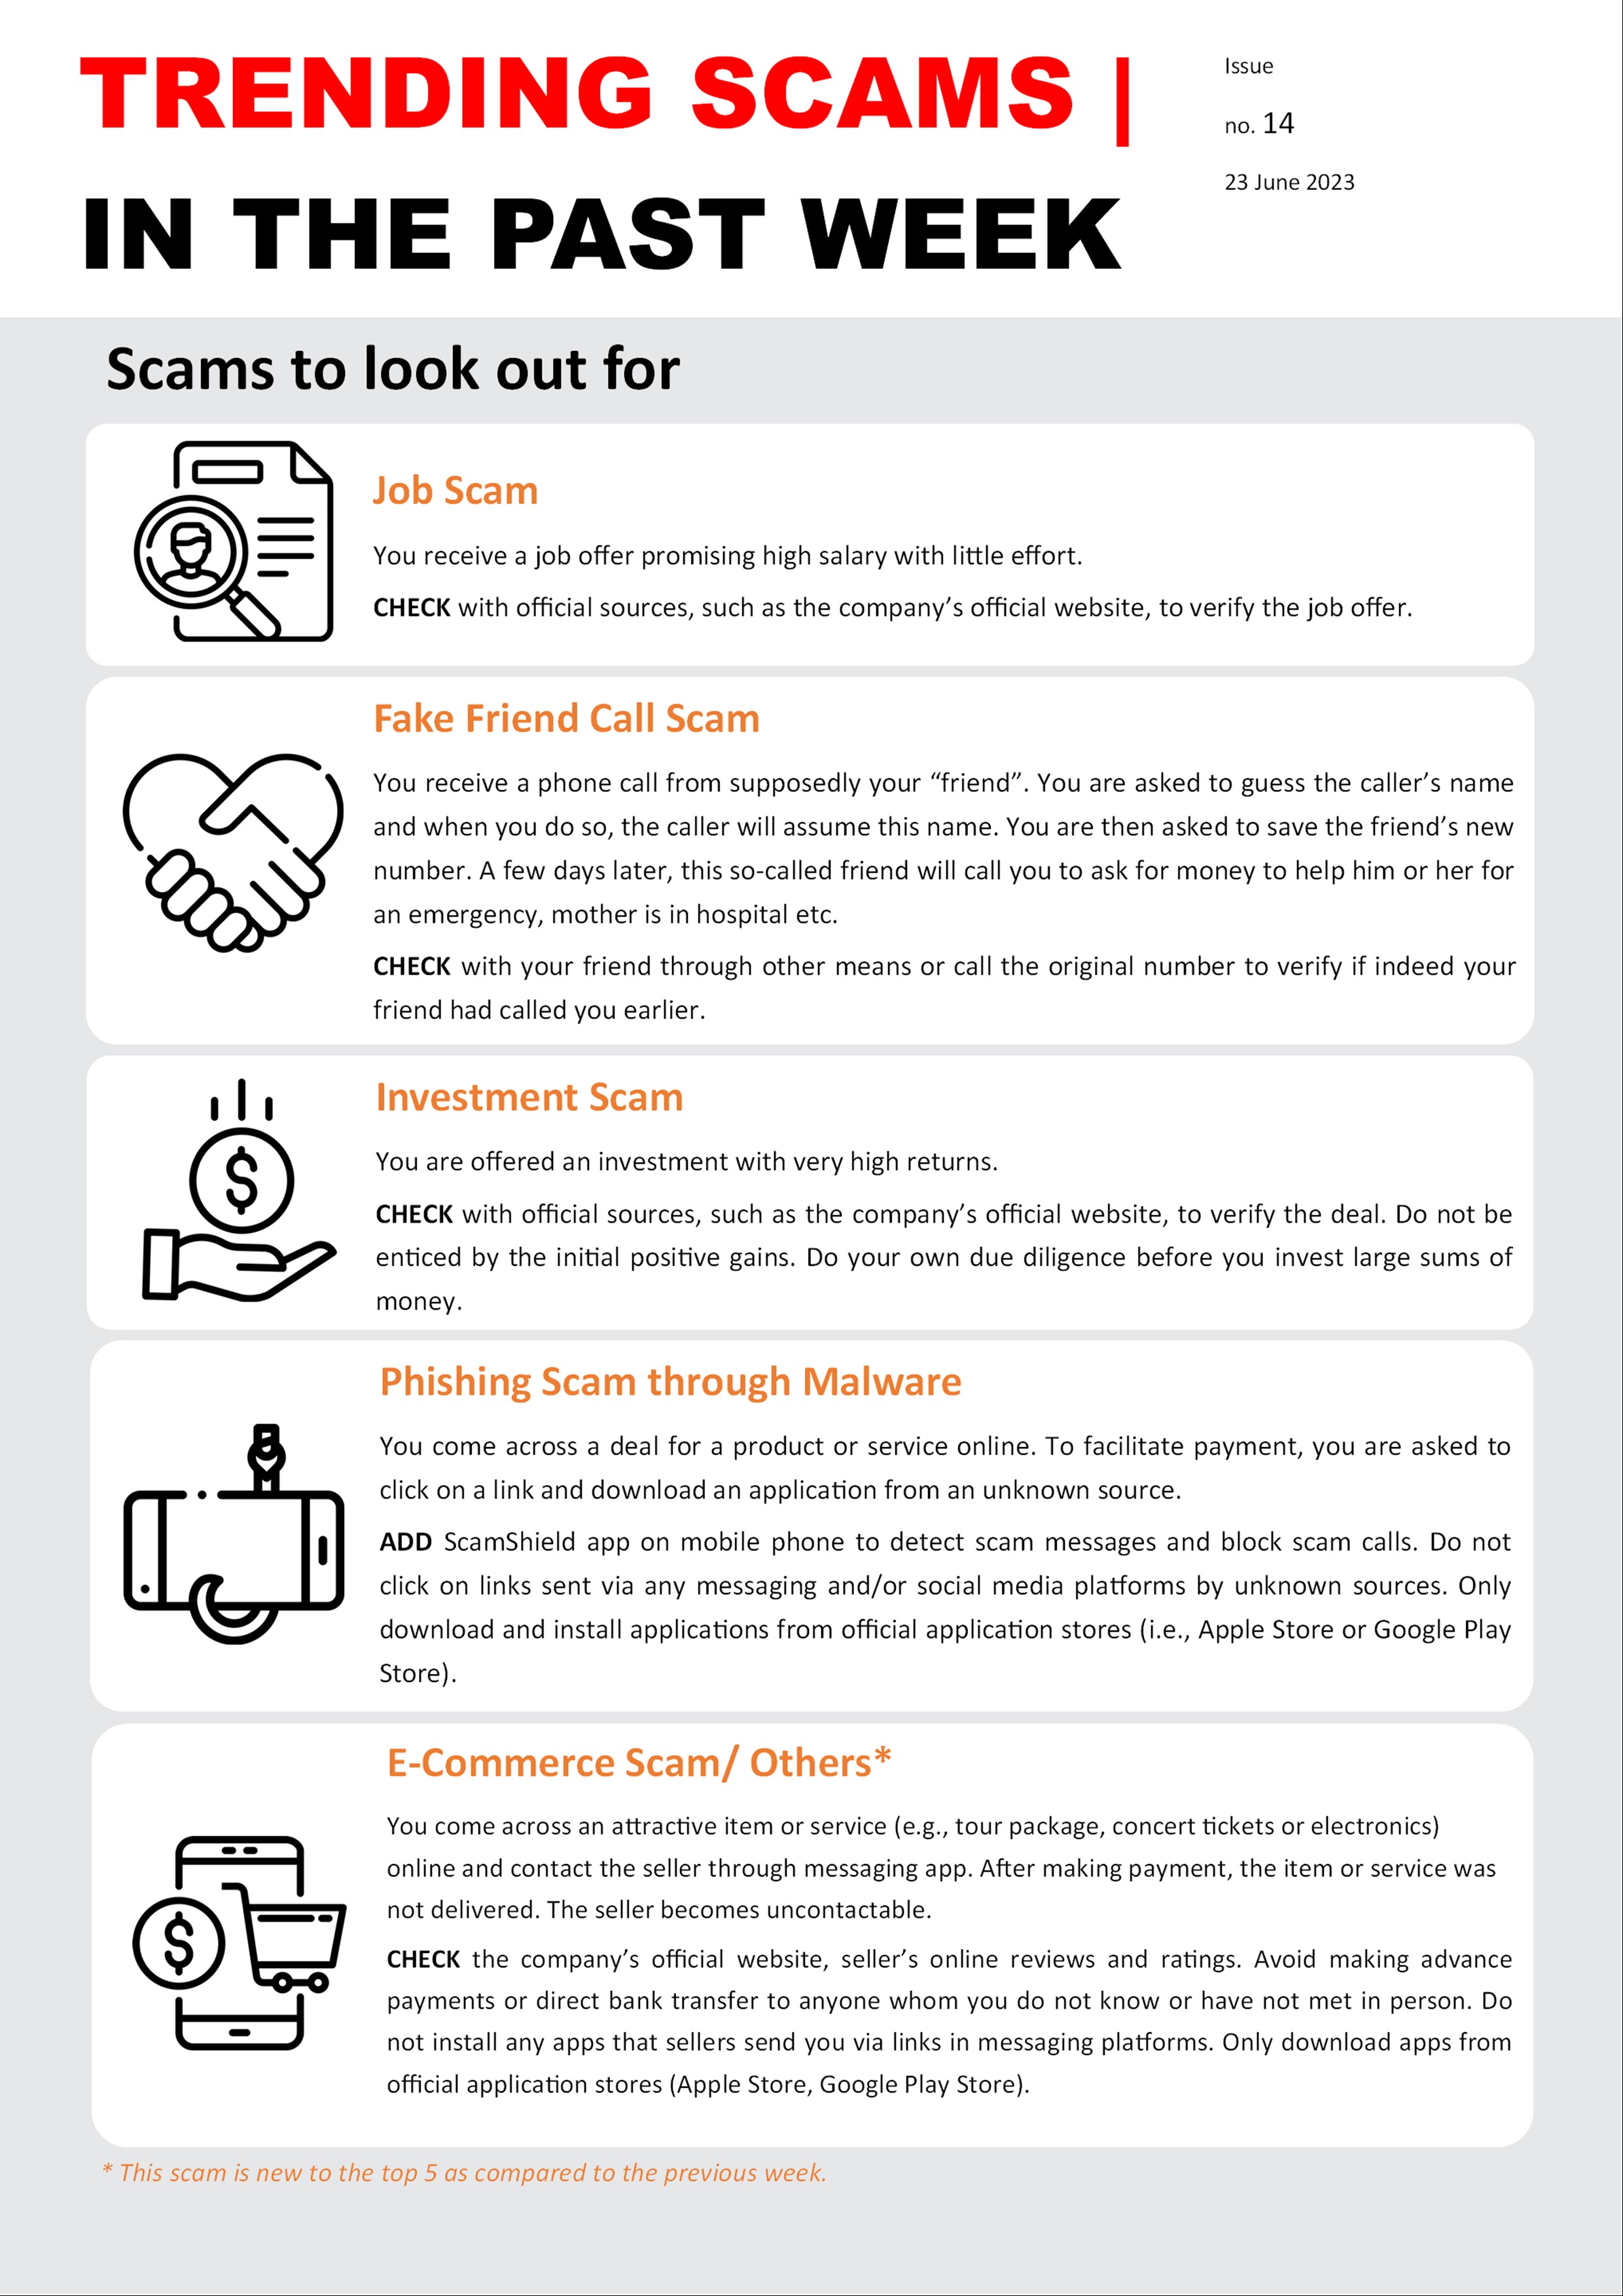 Weekly Bulletin Issue 14 - Scams to look out for